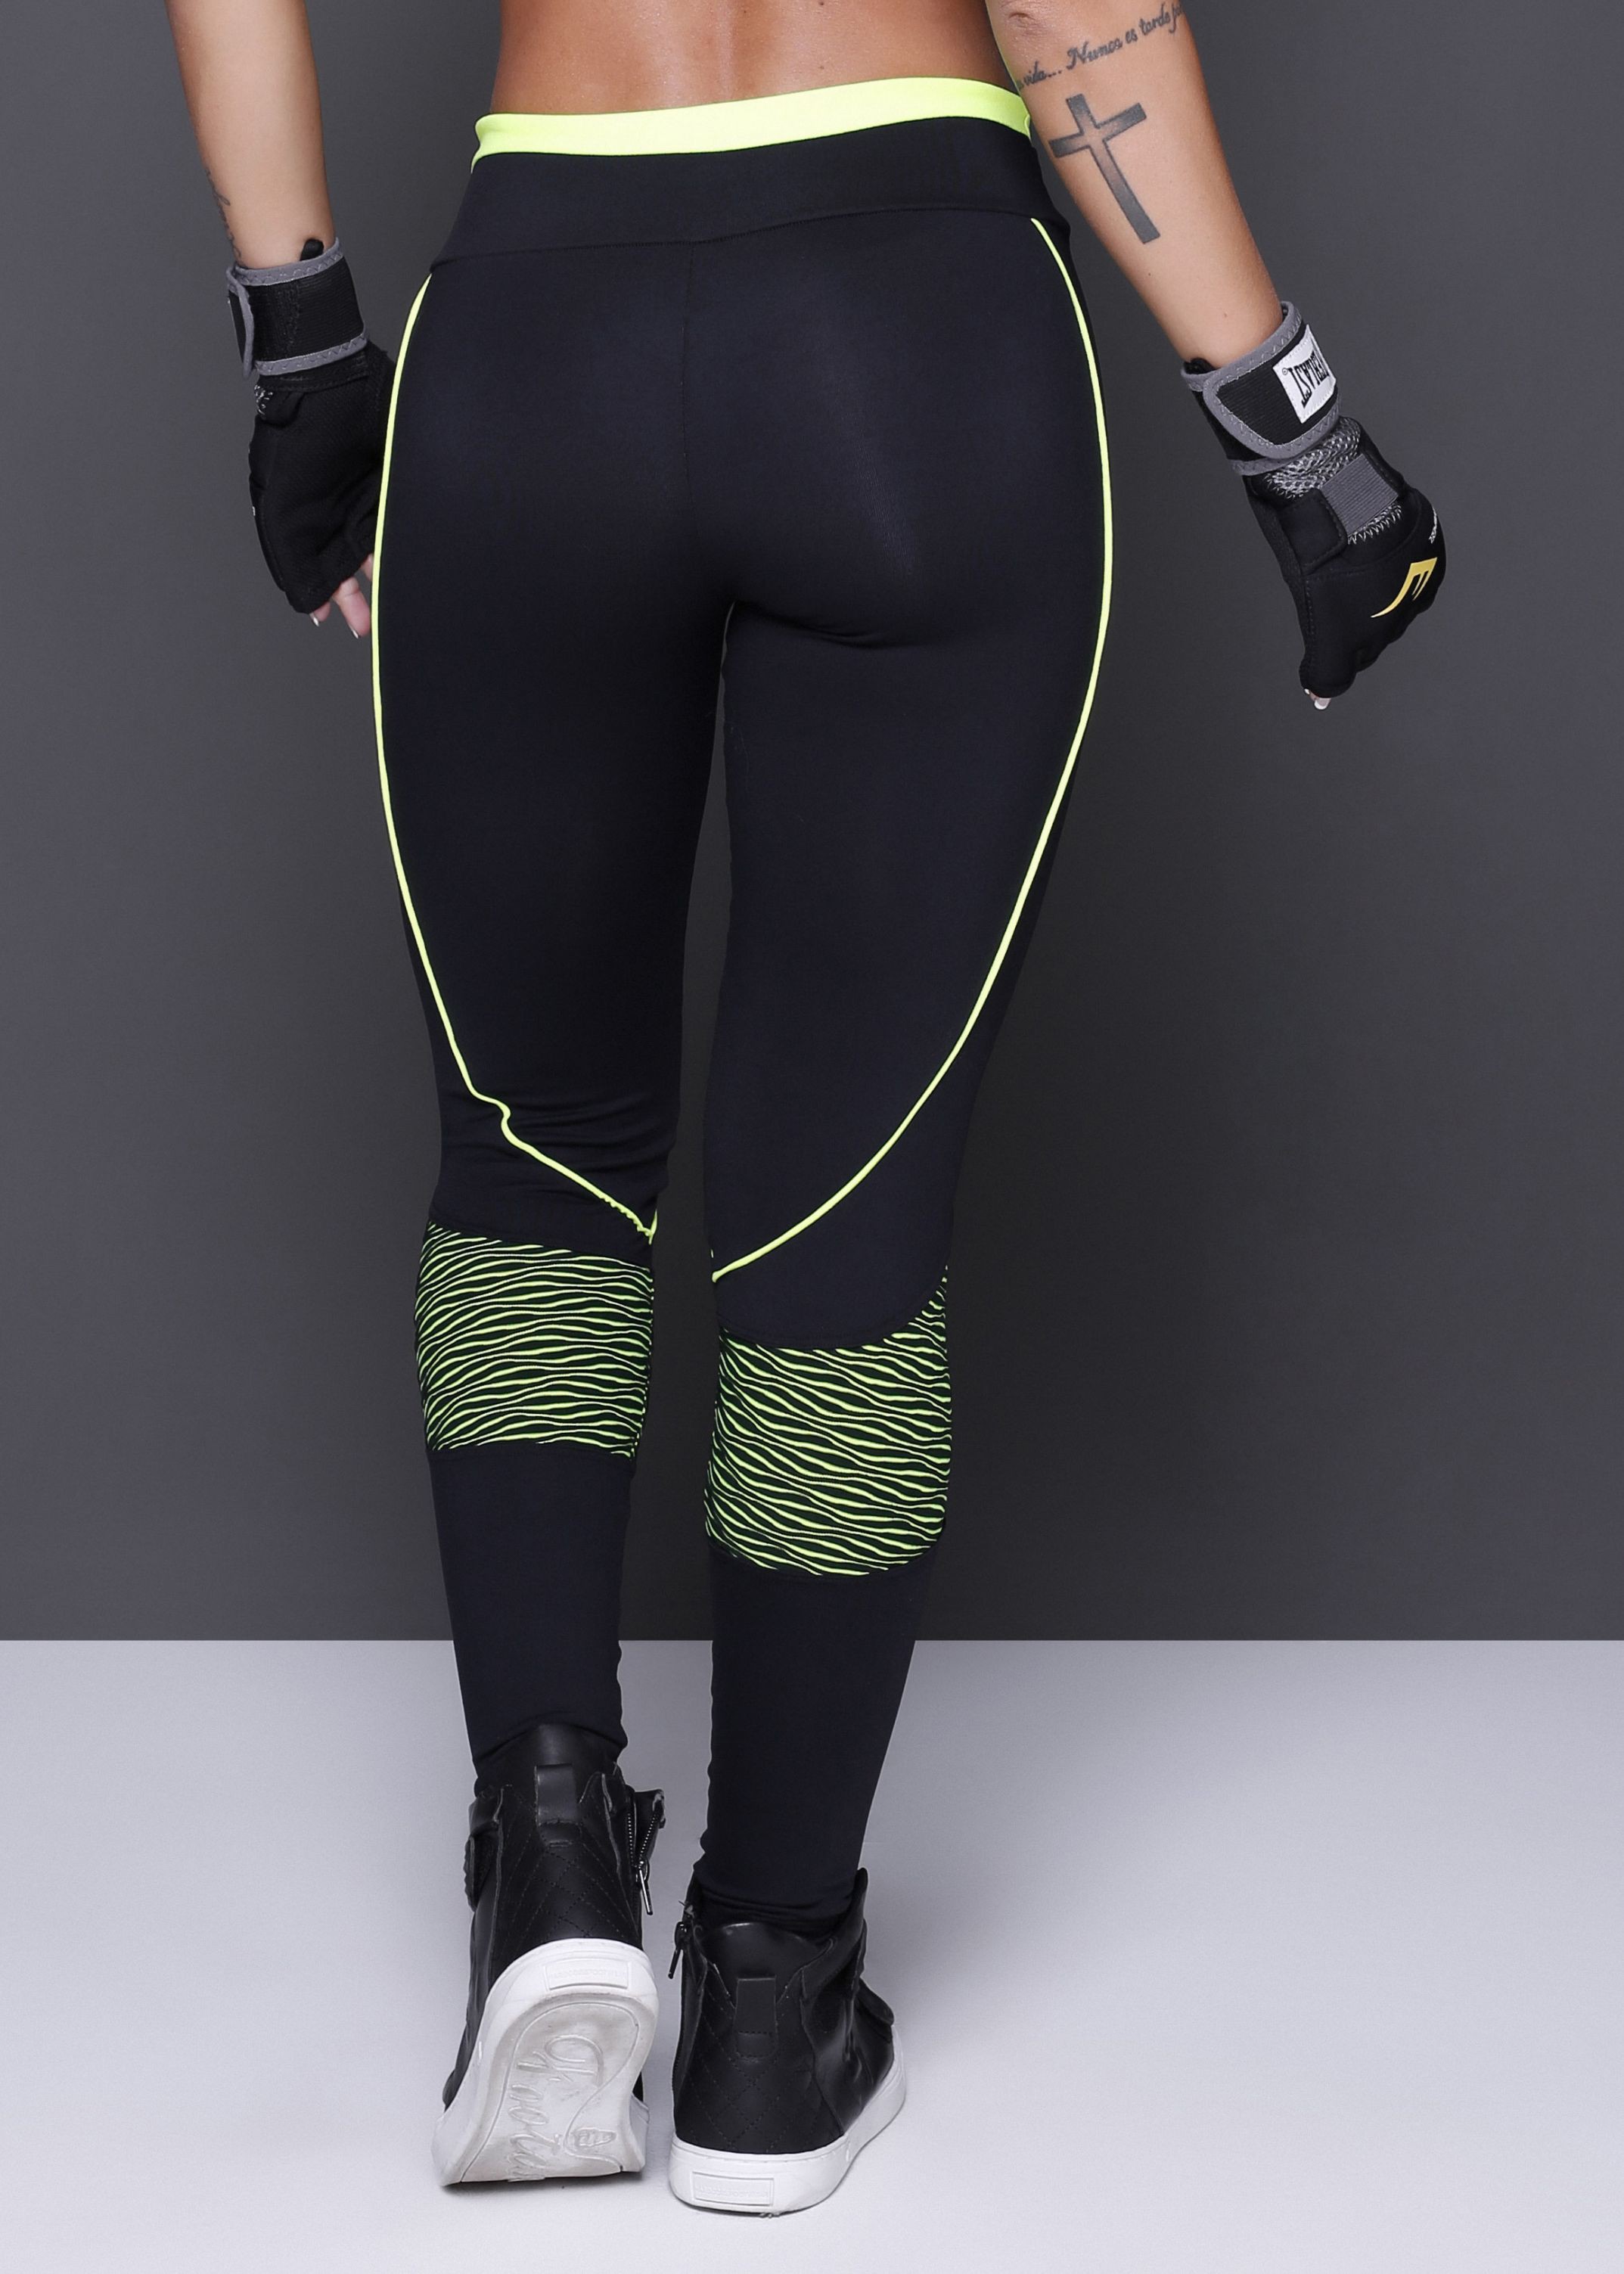 Spandex Leggings Fitness  International Society of Precision Agriculture